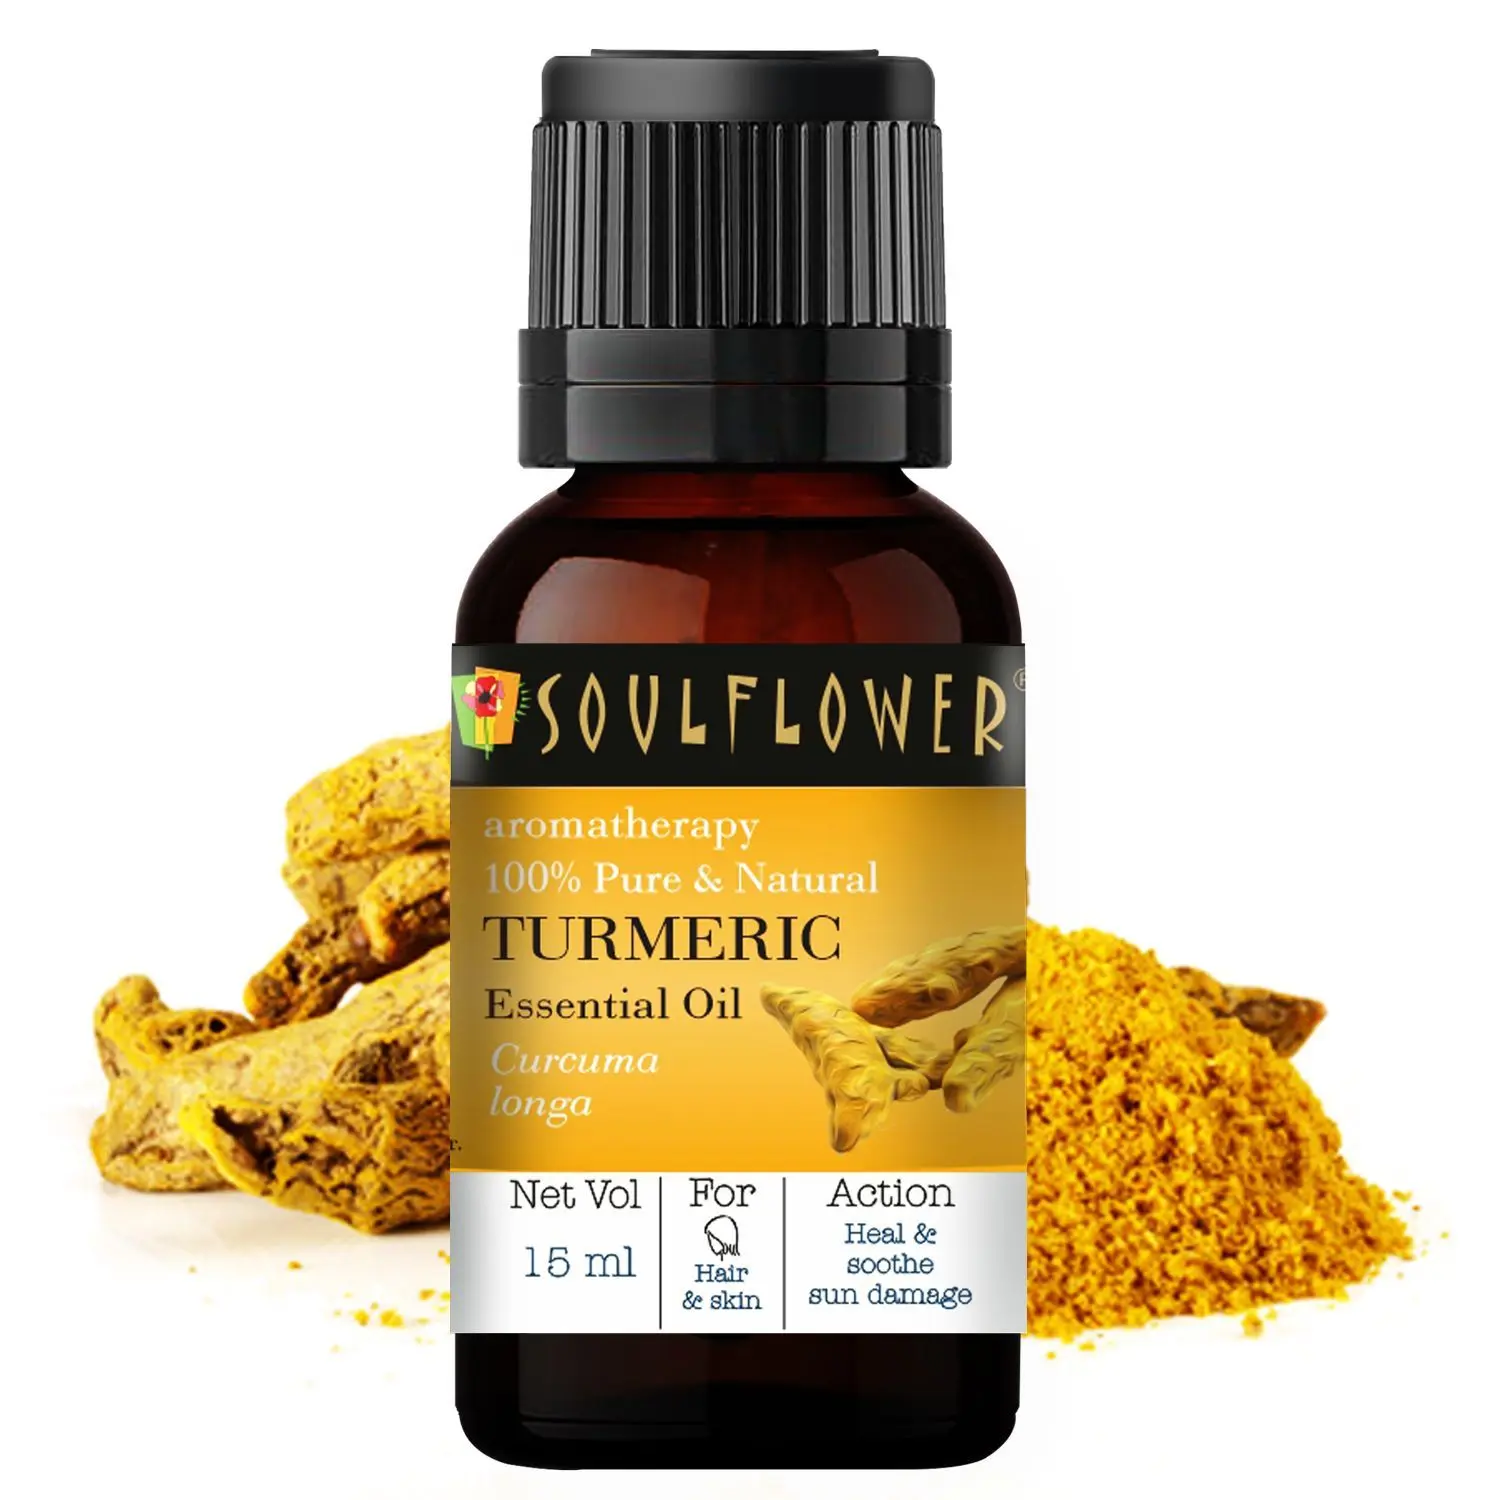 Soulflower Turmeric Essential Oil, For All & Sensitive Skin & Hair Type, 100% Pure & Natural, Therapeutic Grade Aromatherapy, Spicy, 15ml